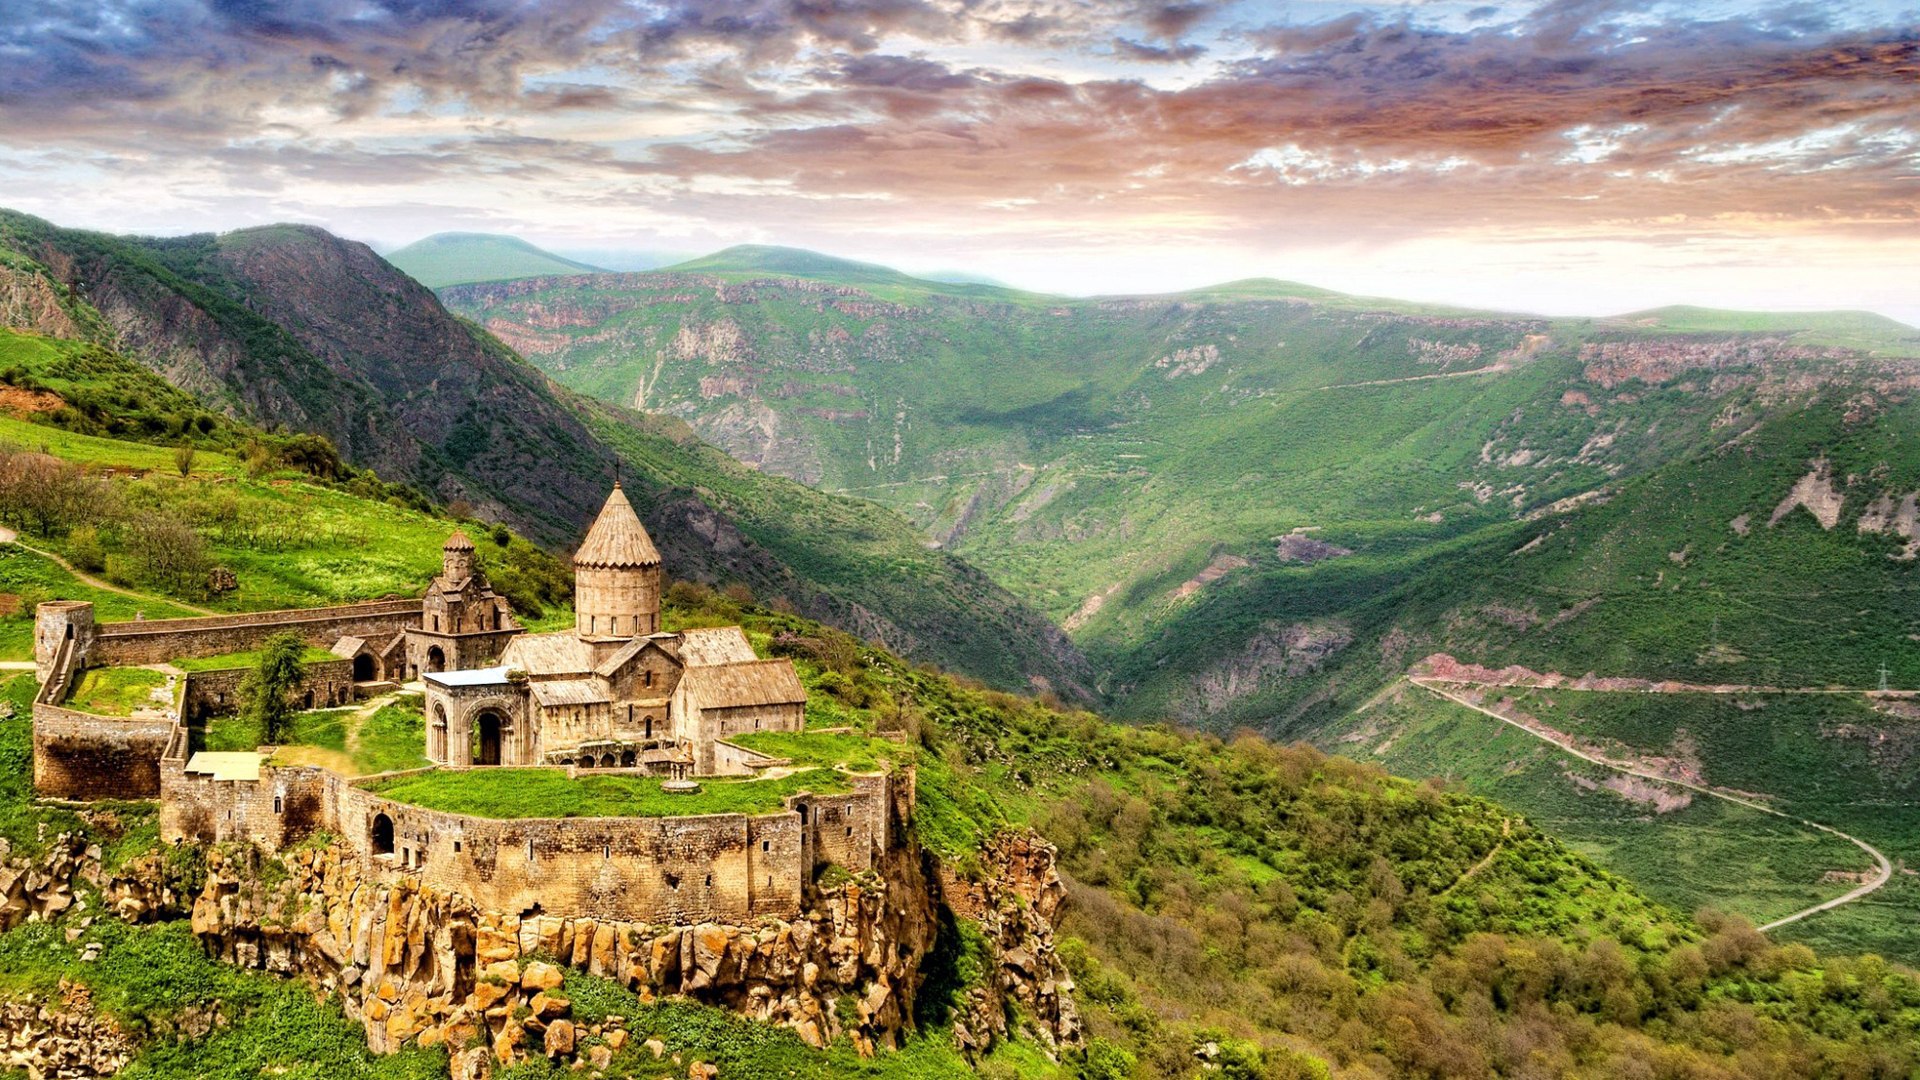 Application and Approval Time Frame for Temporary Residence Permit in Armenia